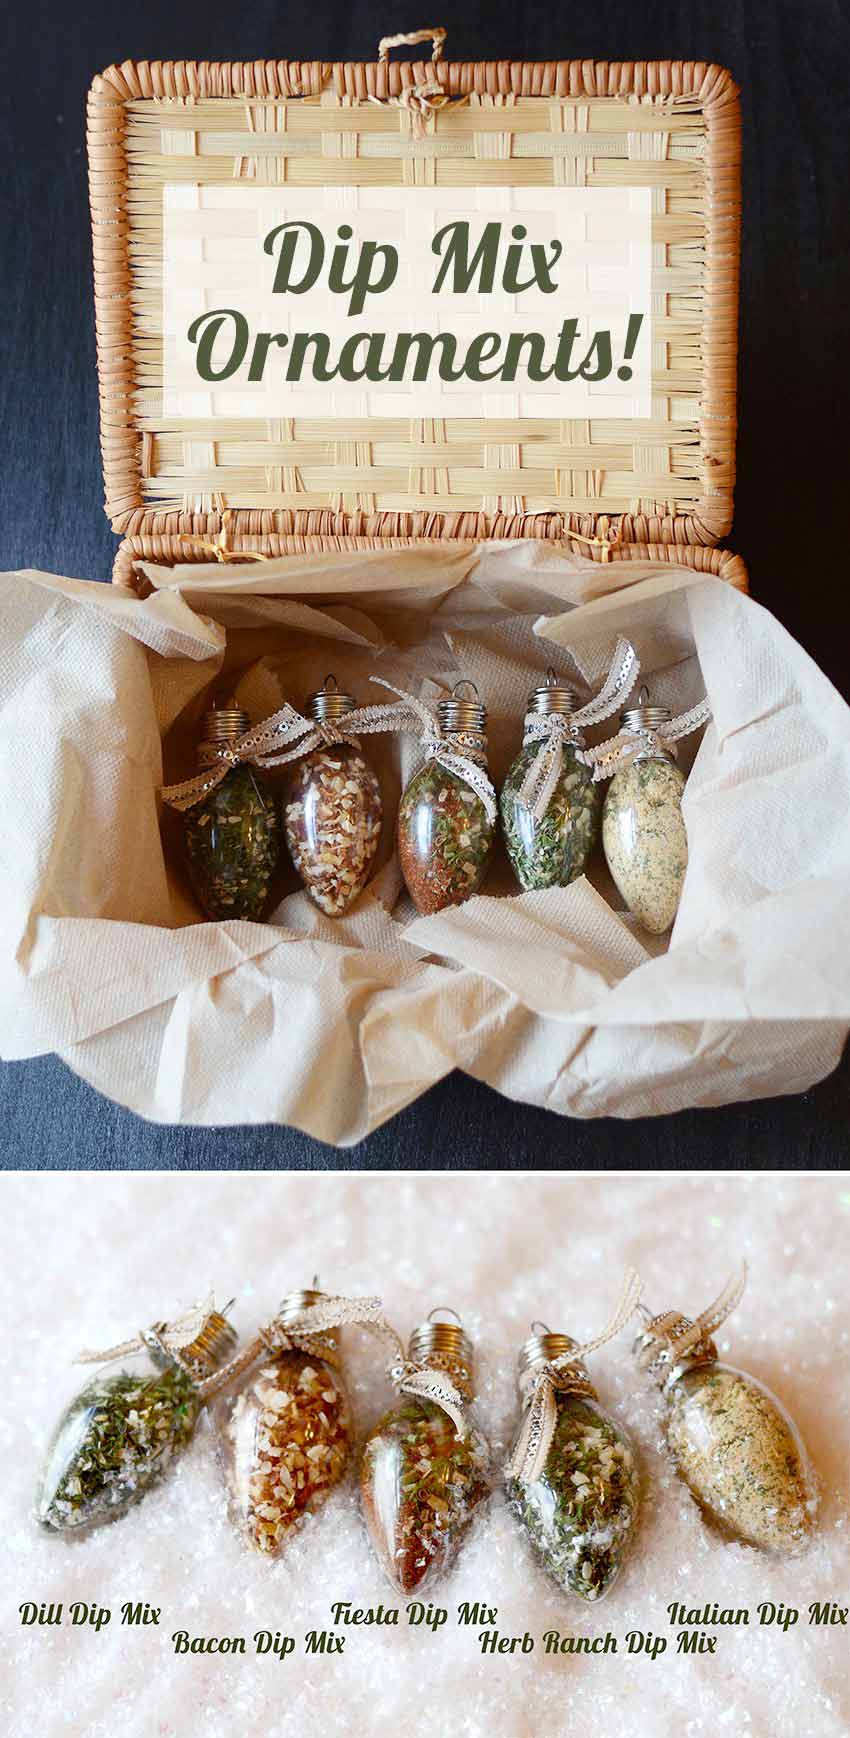 DIY Gifts for Your Parents | Cool and Easy Homemade Gift Ideas That Mom and Dad Will Love | Creative Christmas Gifts for Parents With Step by Step Instructions | Crafts and DIY Projects by DIY JOY | Dip-Mix-Ornaments #diy #diygifts #christmasgifts